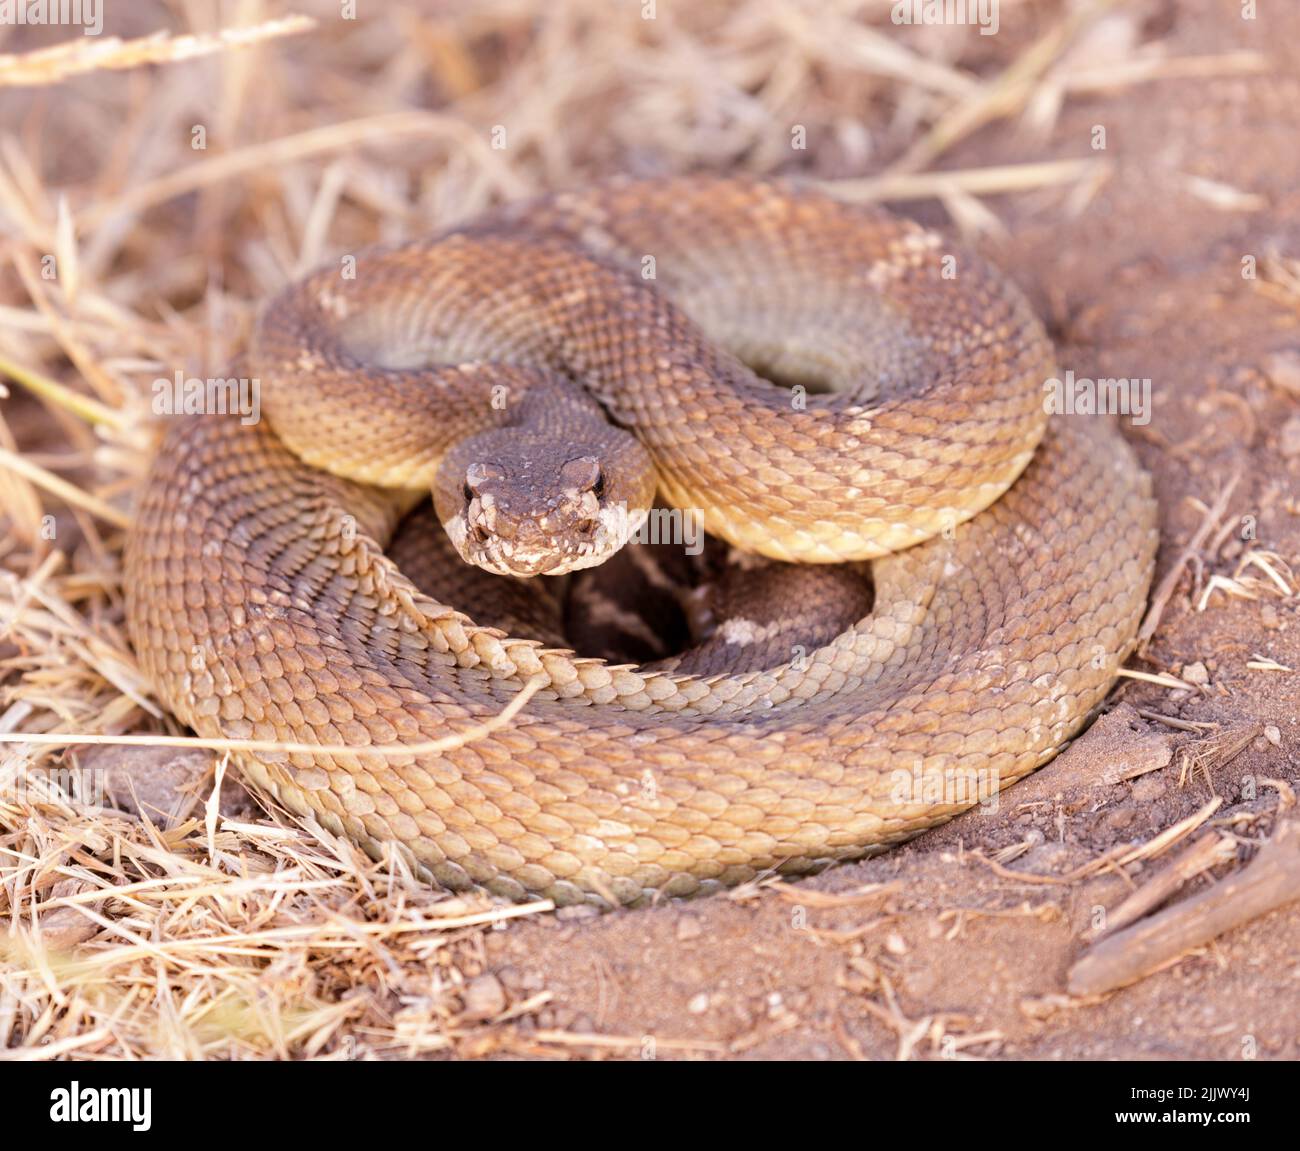 Coiled Young Northern Pacific Rattlesnake in defensive posture. Mission Peak Regional Preserve, Alameda County, California, USA. Stock Photo